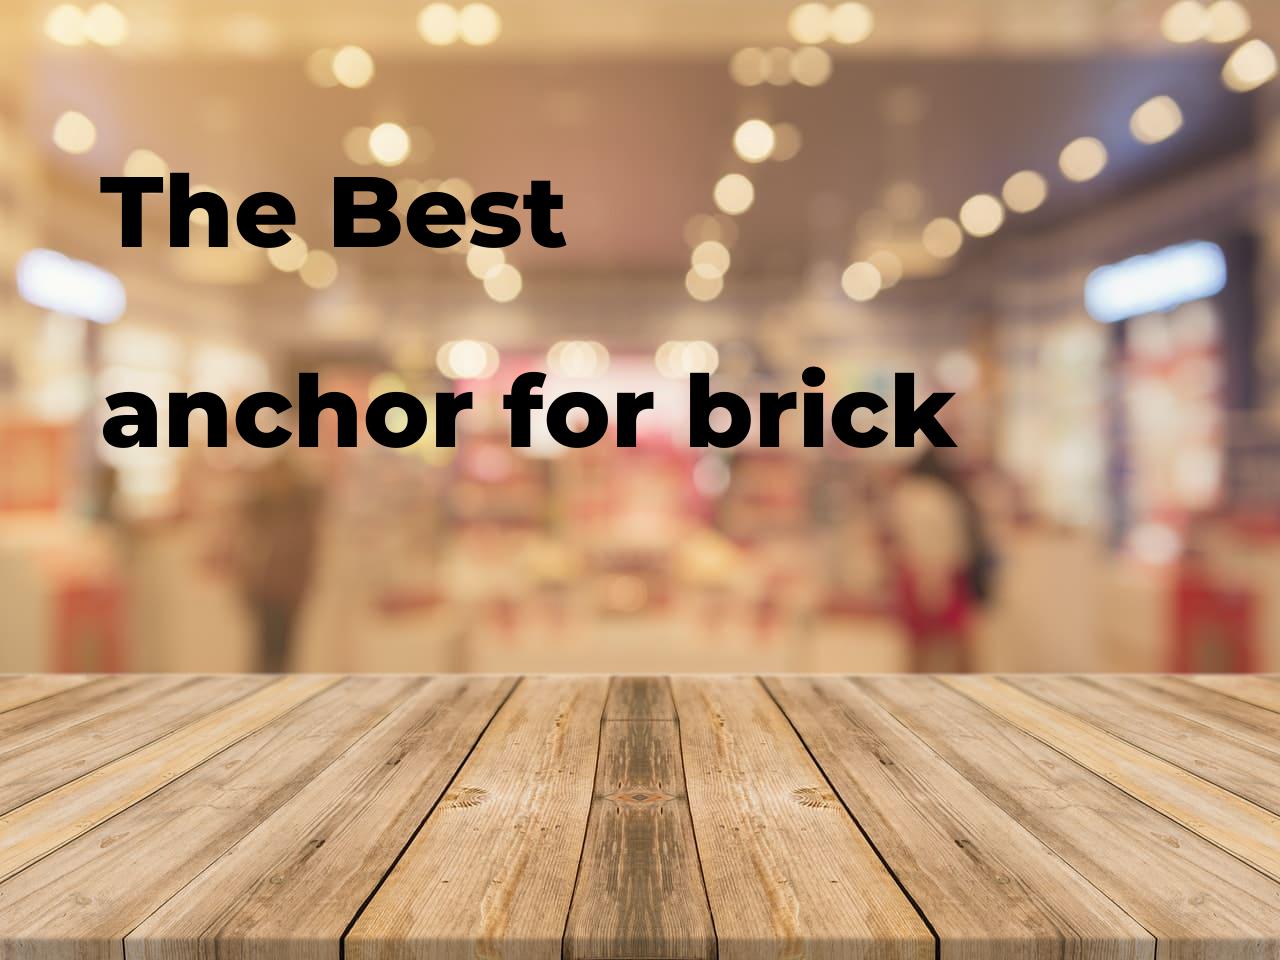 The best anchor for brick